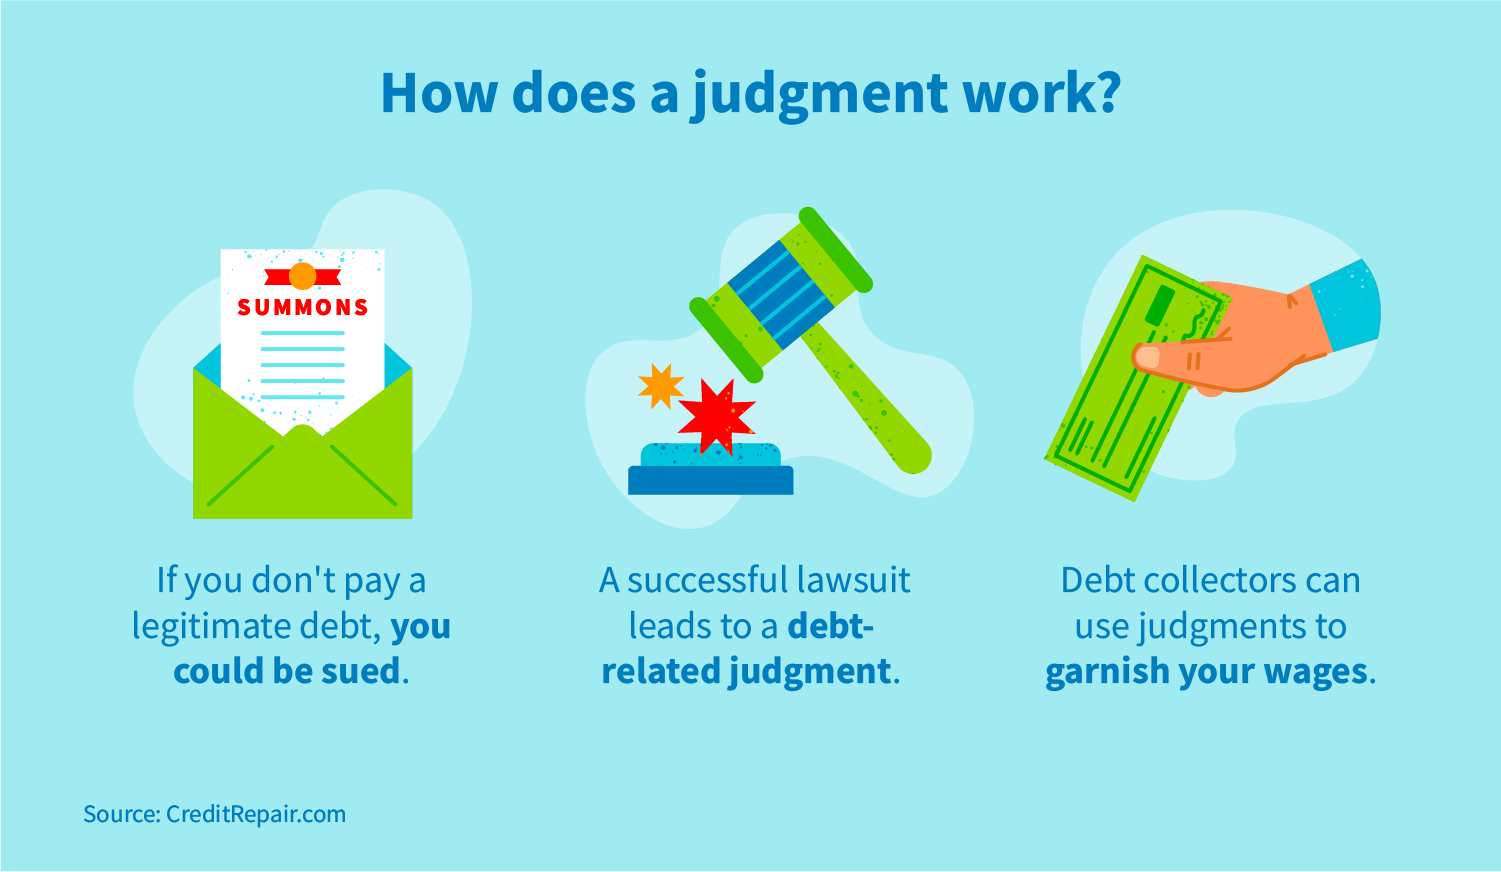 How does a judgment work?